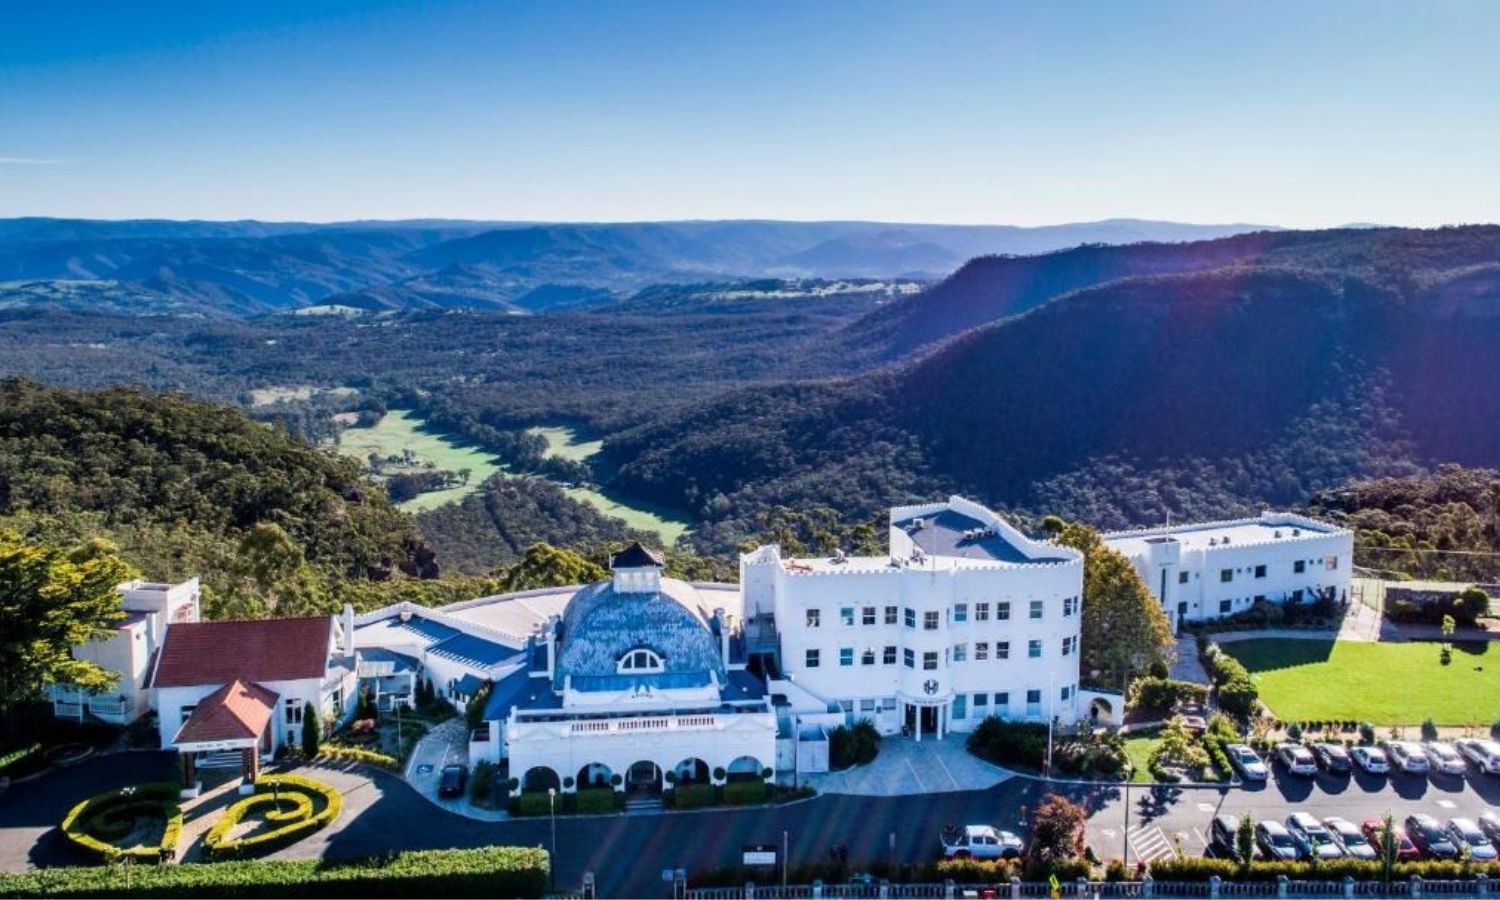 The Hydro Majestic Blue Mountains Hotel